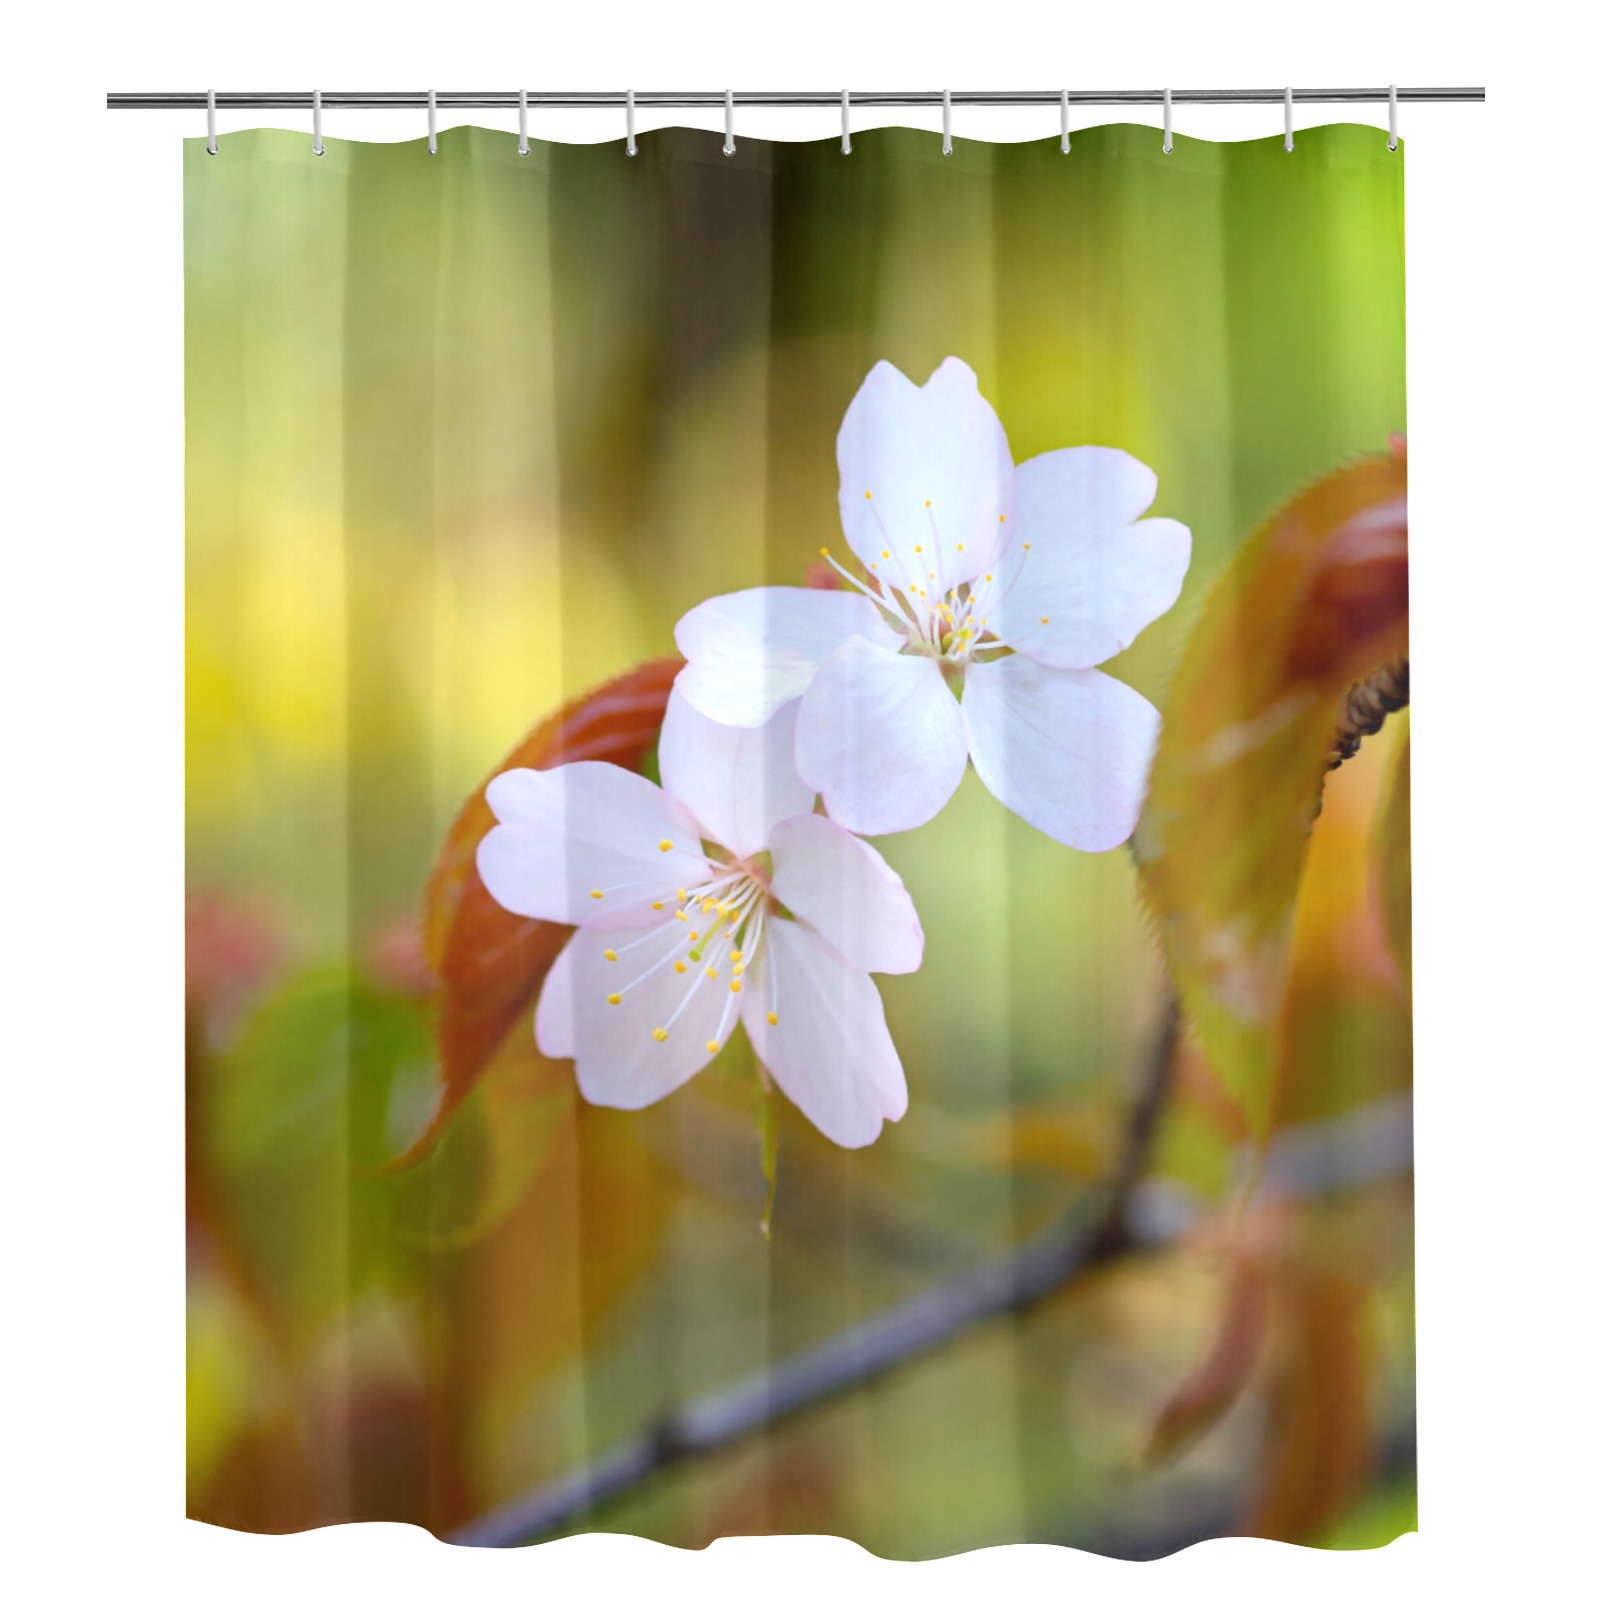 Two sakura cherry flowers, colorful background. Shower Curtain 72"x84"